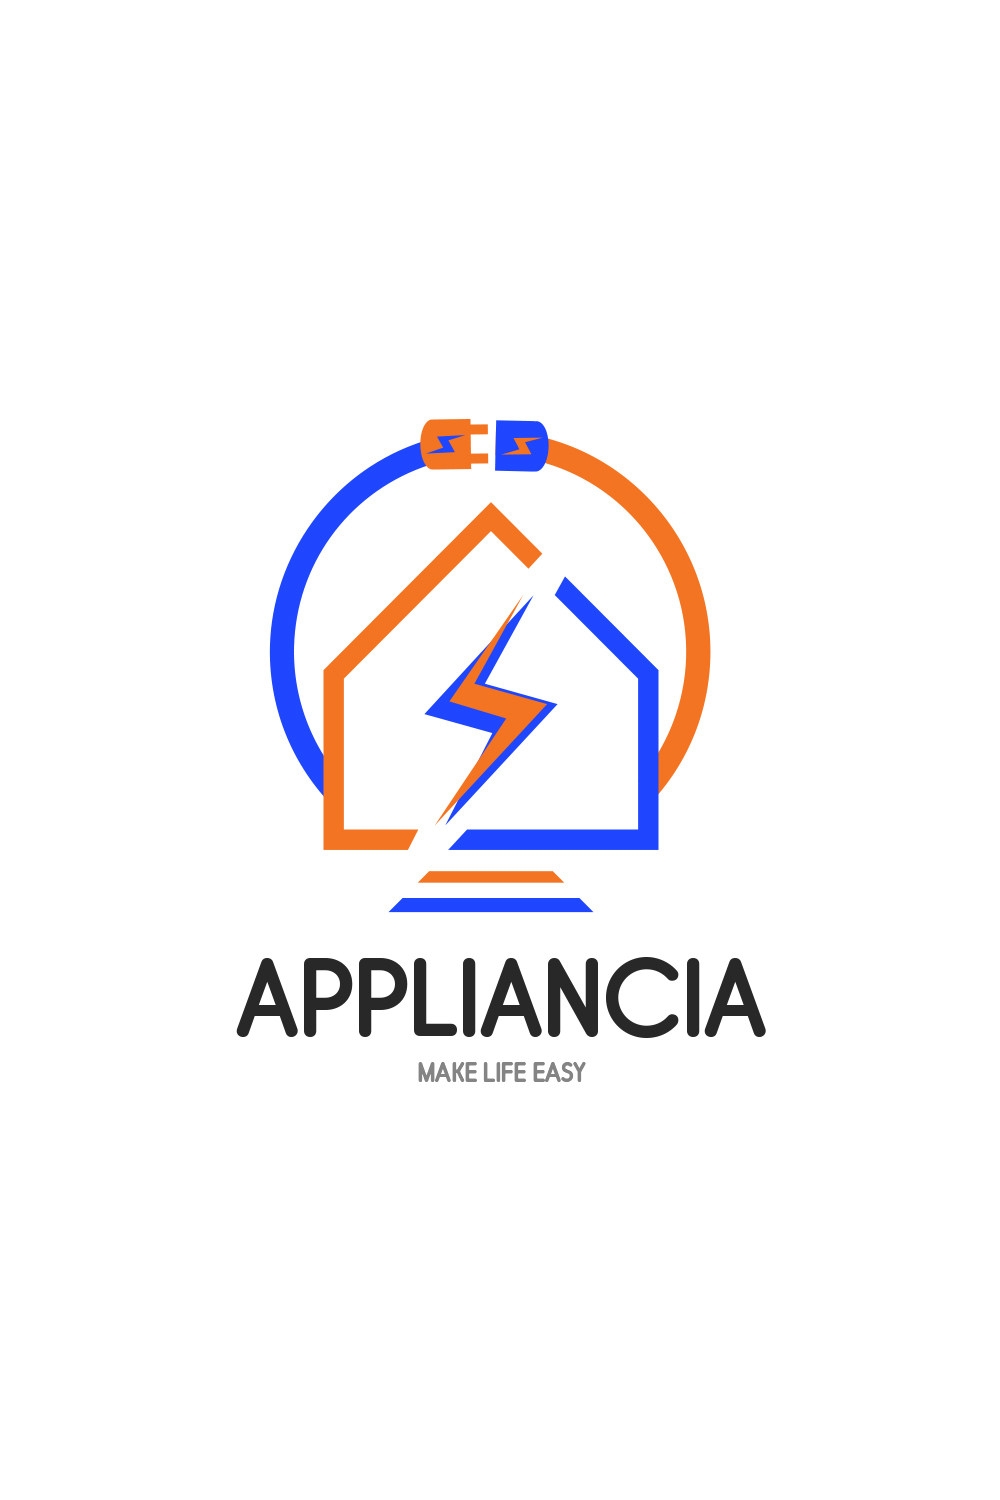 Electrical House Logo Template Pinterest image.